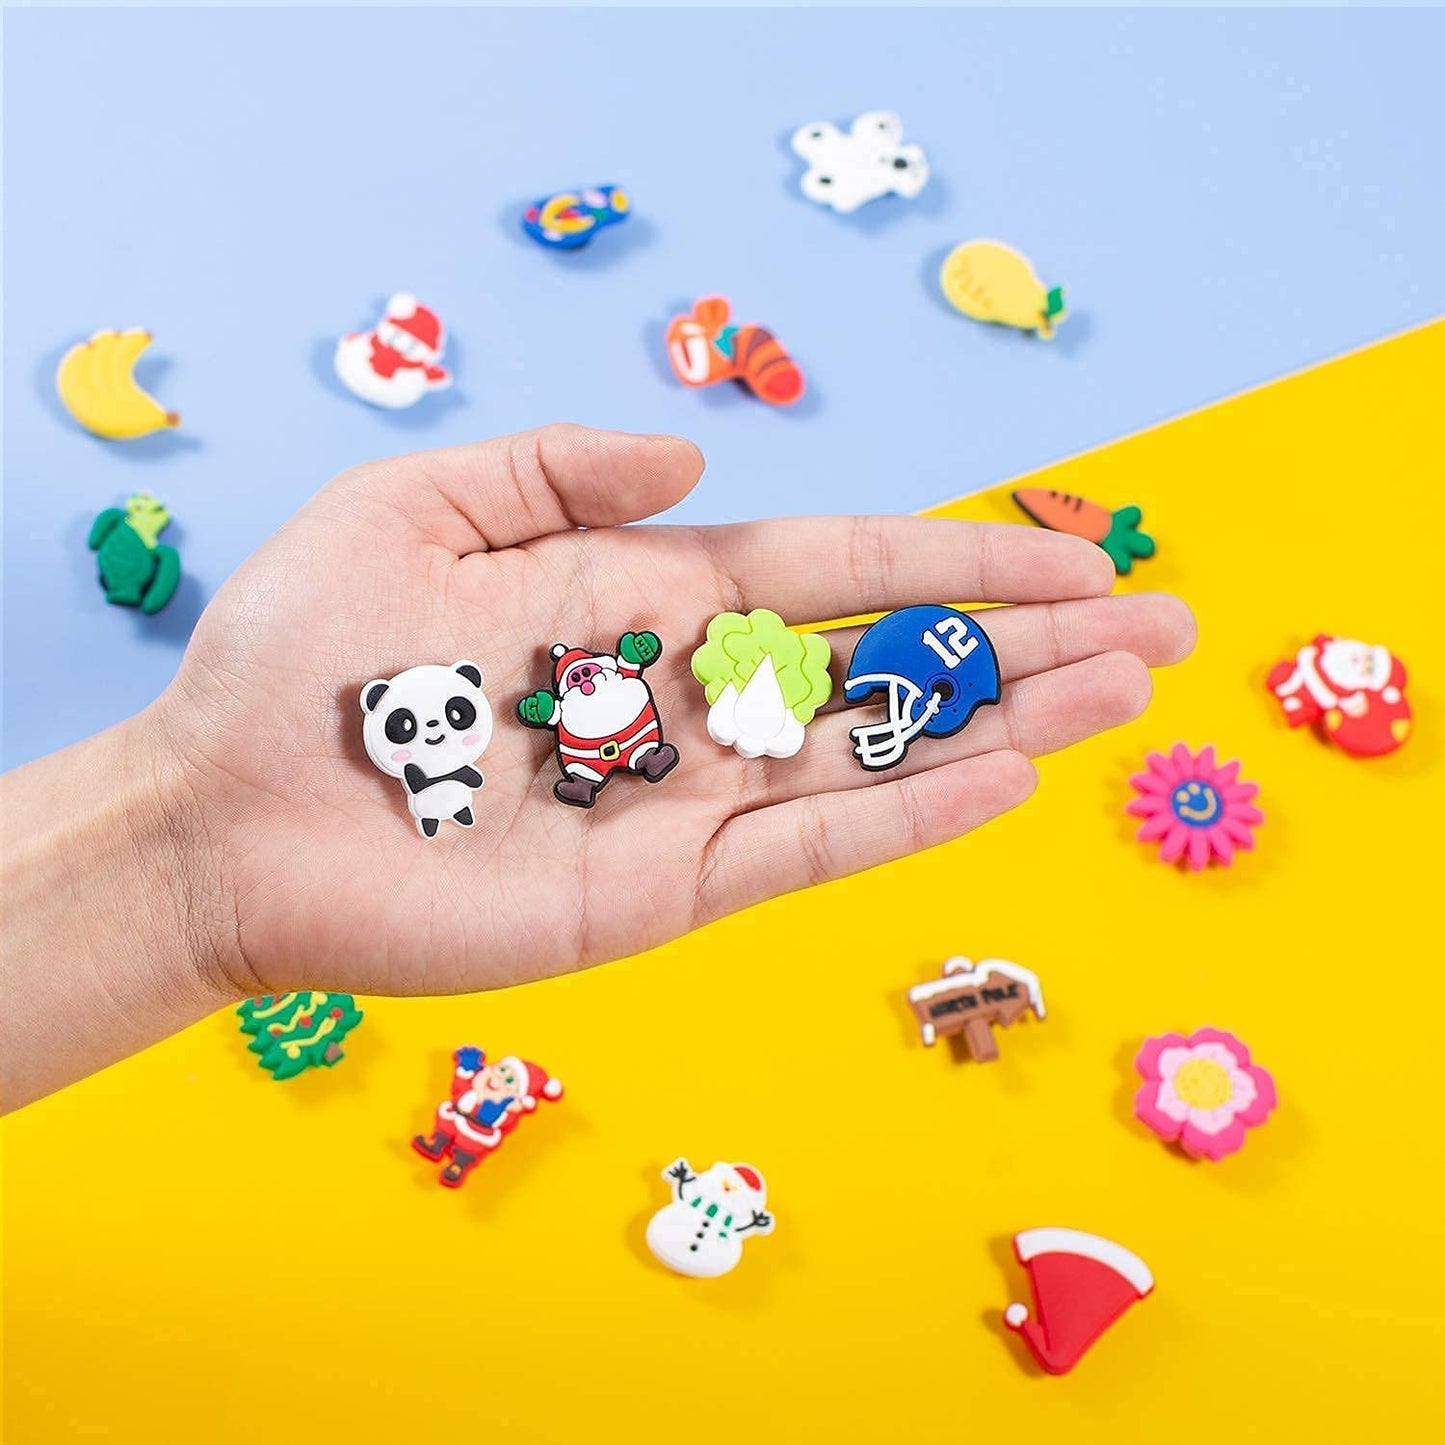 1pcs Number Letter Shoe Charms Decorations for Crocs Sandals Boys Girls Kids Women Teens Christmas Gifts Birthday Party Favors 1pcs Number Letter Shoe Charms Decorations for Crocs Sandals Boys Girls Kids Women Teens Christmas Gifts Birthday Party Favors Foreverking